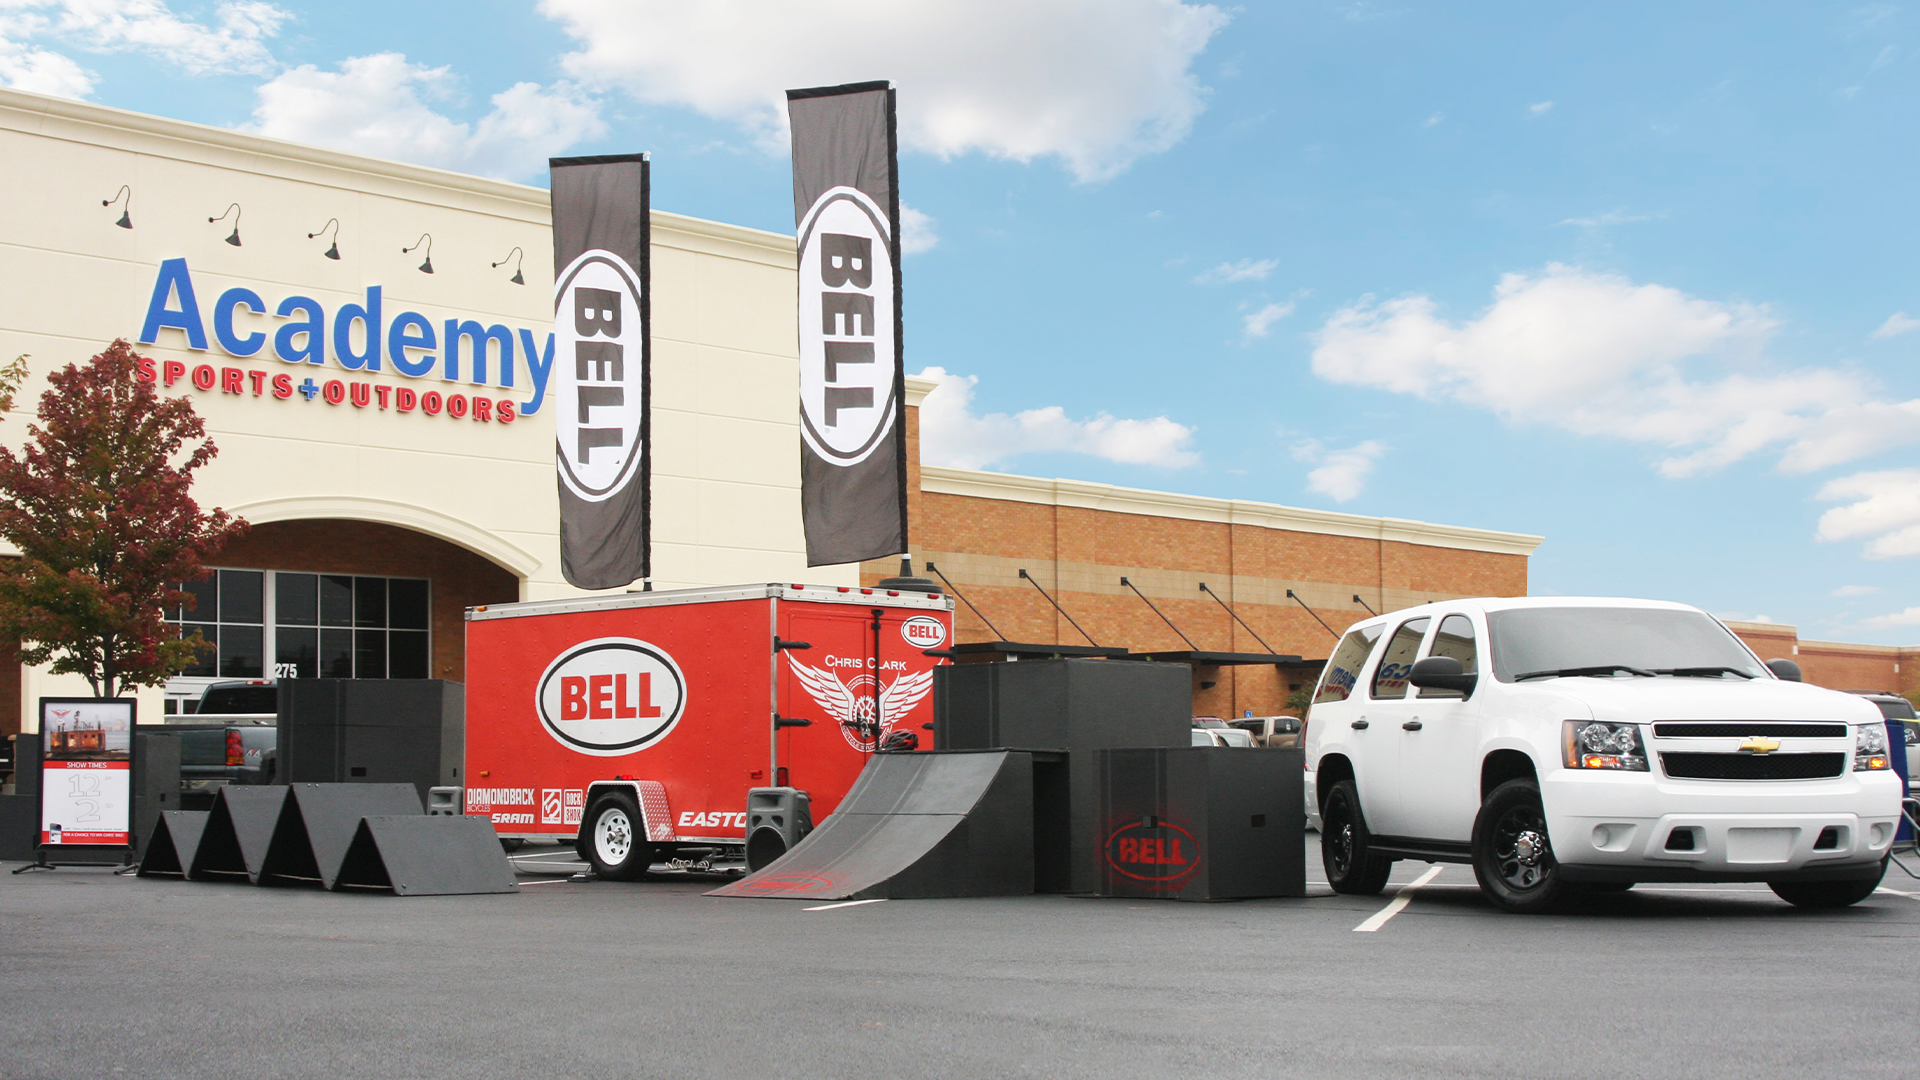 One of 27 grand opening events conducted by Dialed Action Sports on behalf of Bell Helmets and Academy Sports + Outdoors